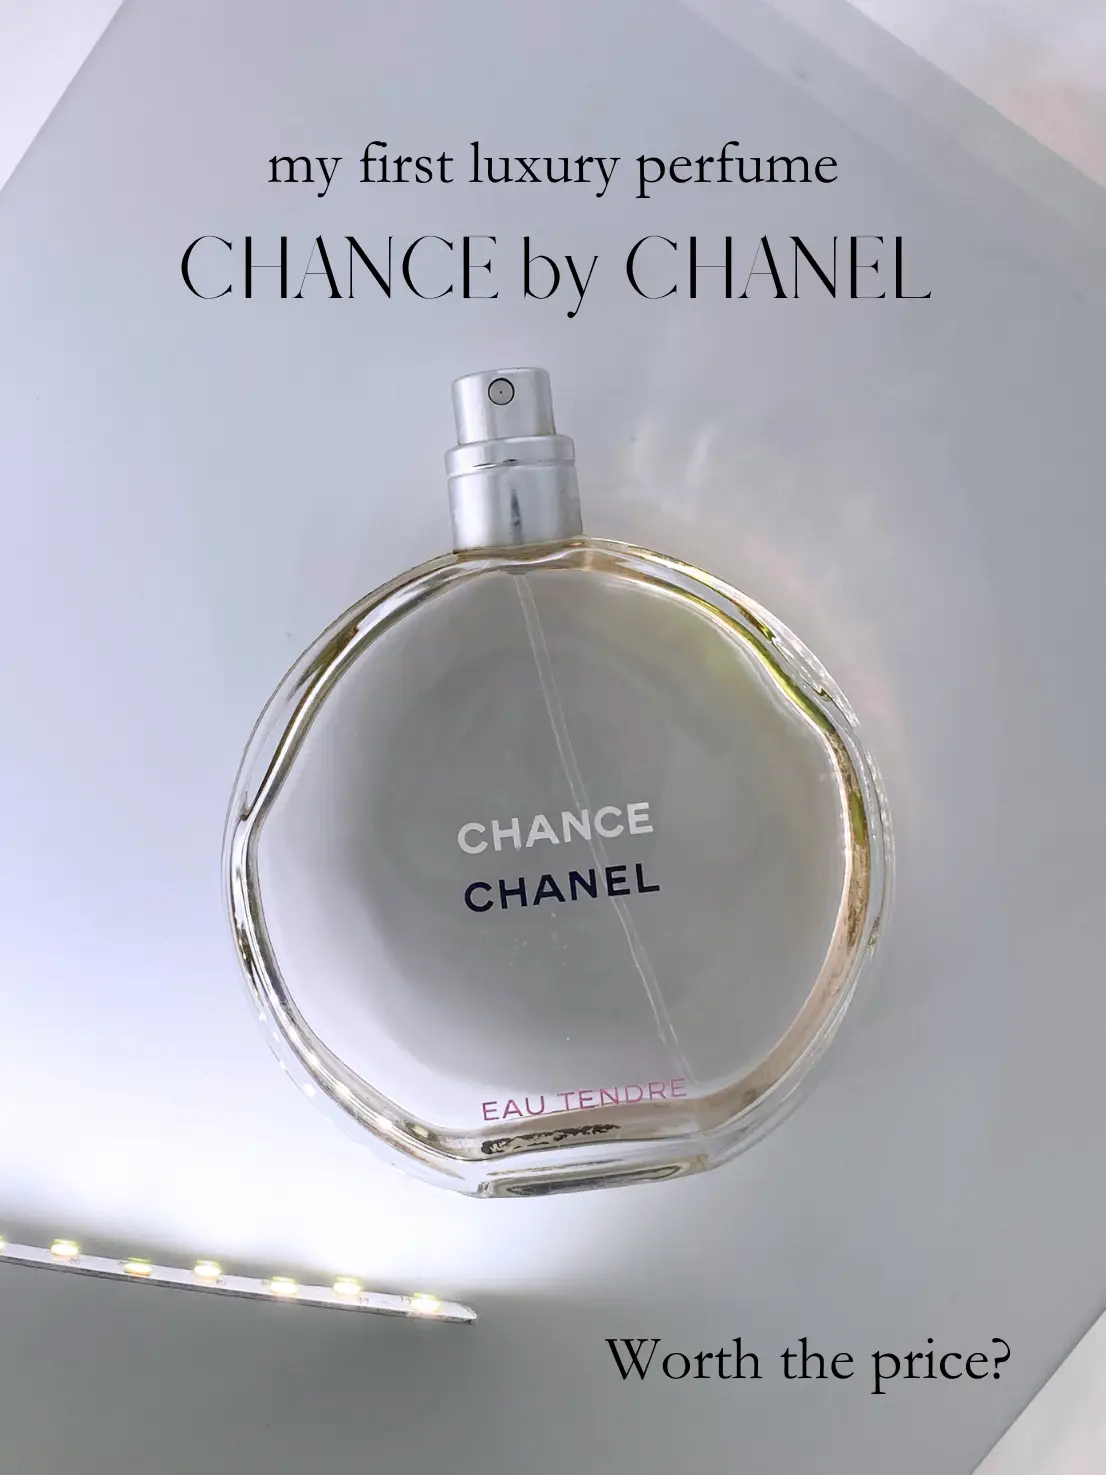 My first every luxury perfume: CHANEL ✨, Gallery posted by Dhiya Dhina